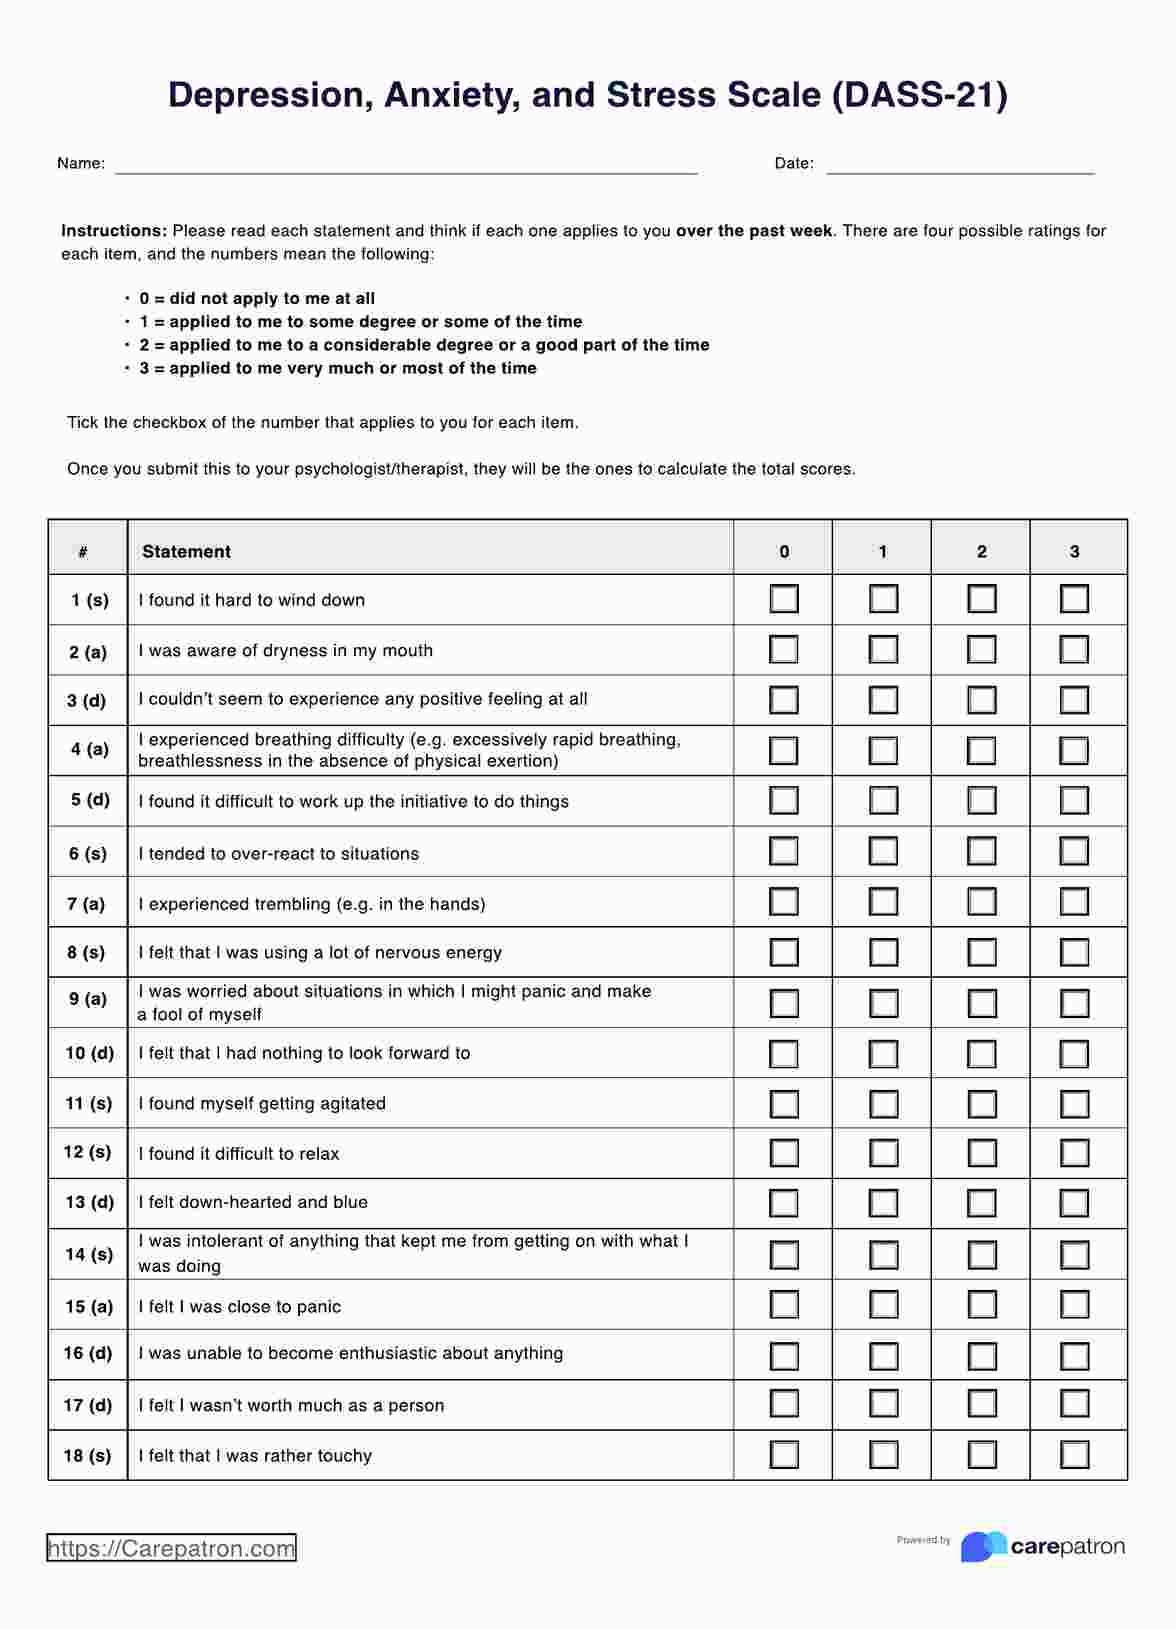 Depression Anxiety and Stress Scale (DASS-21) PDF Example